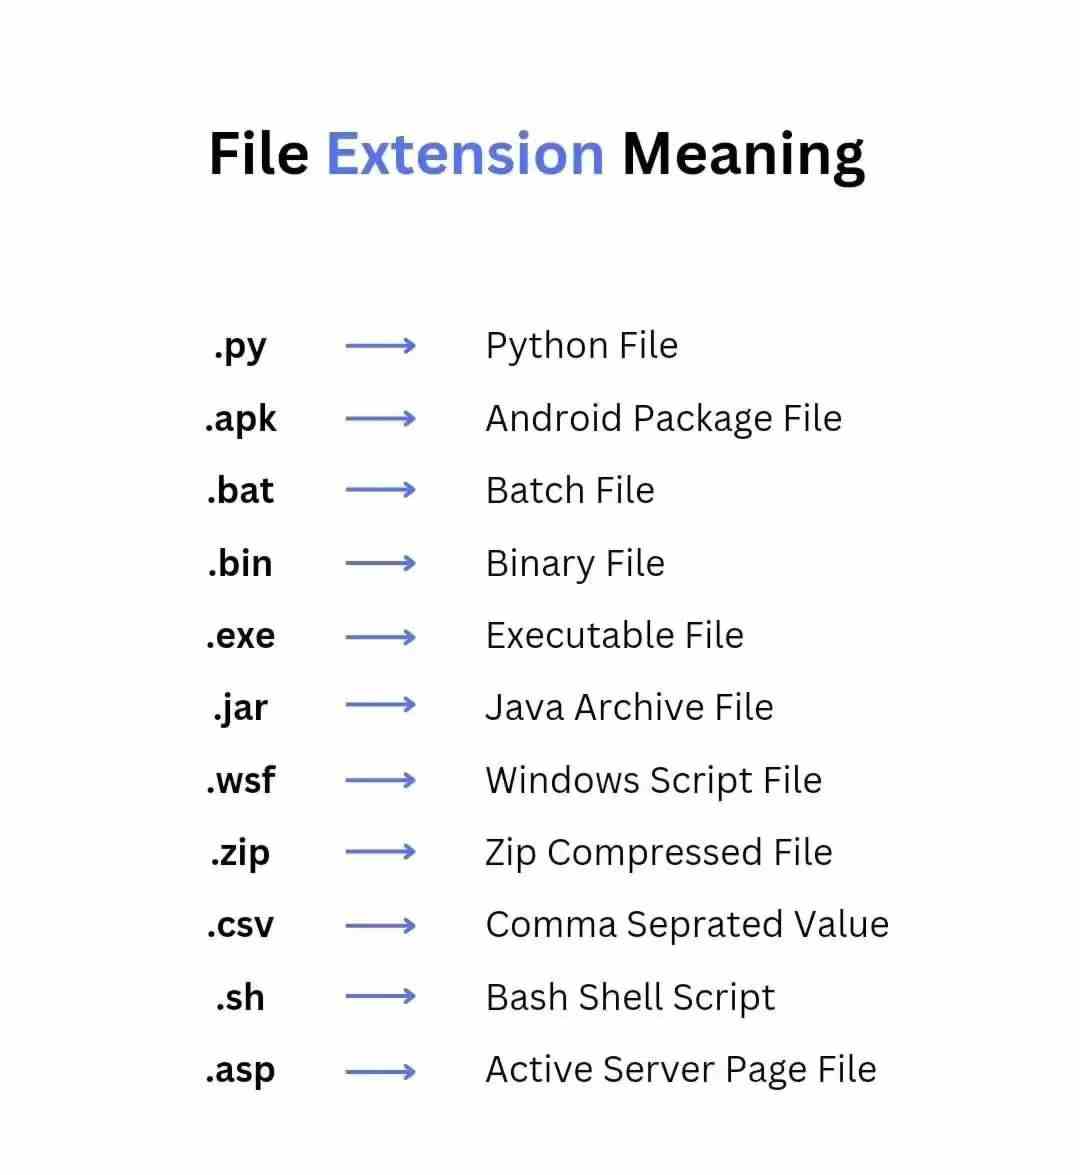 File Extension Meaning